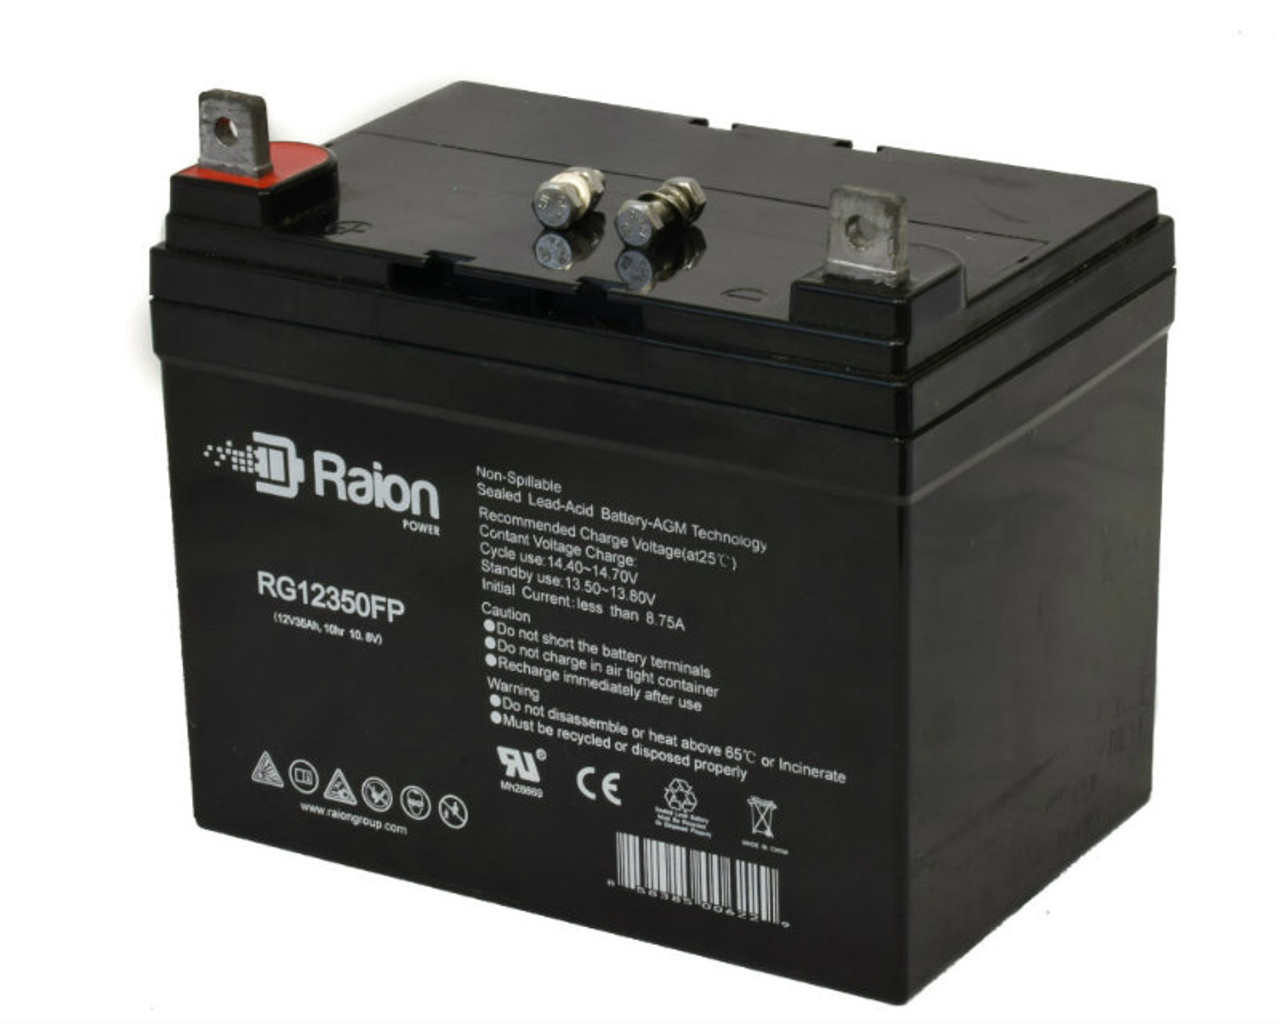 Raion Power Replacement 12V 35Ah RG12350FP Mobility Scooter Battery for Pride Mobility Jazzy 1103 Ultra